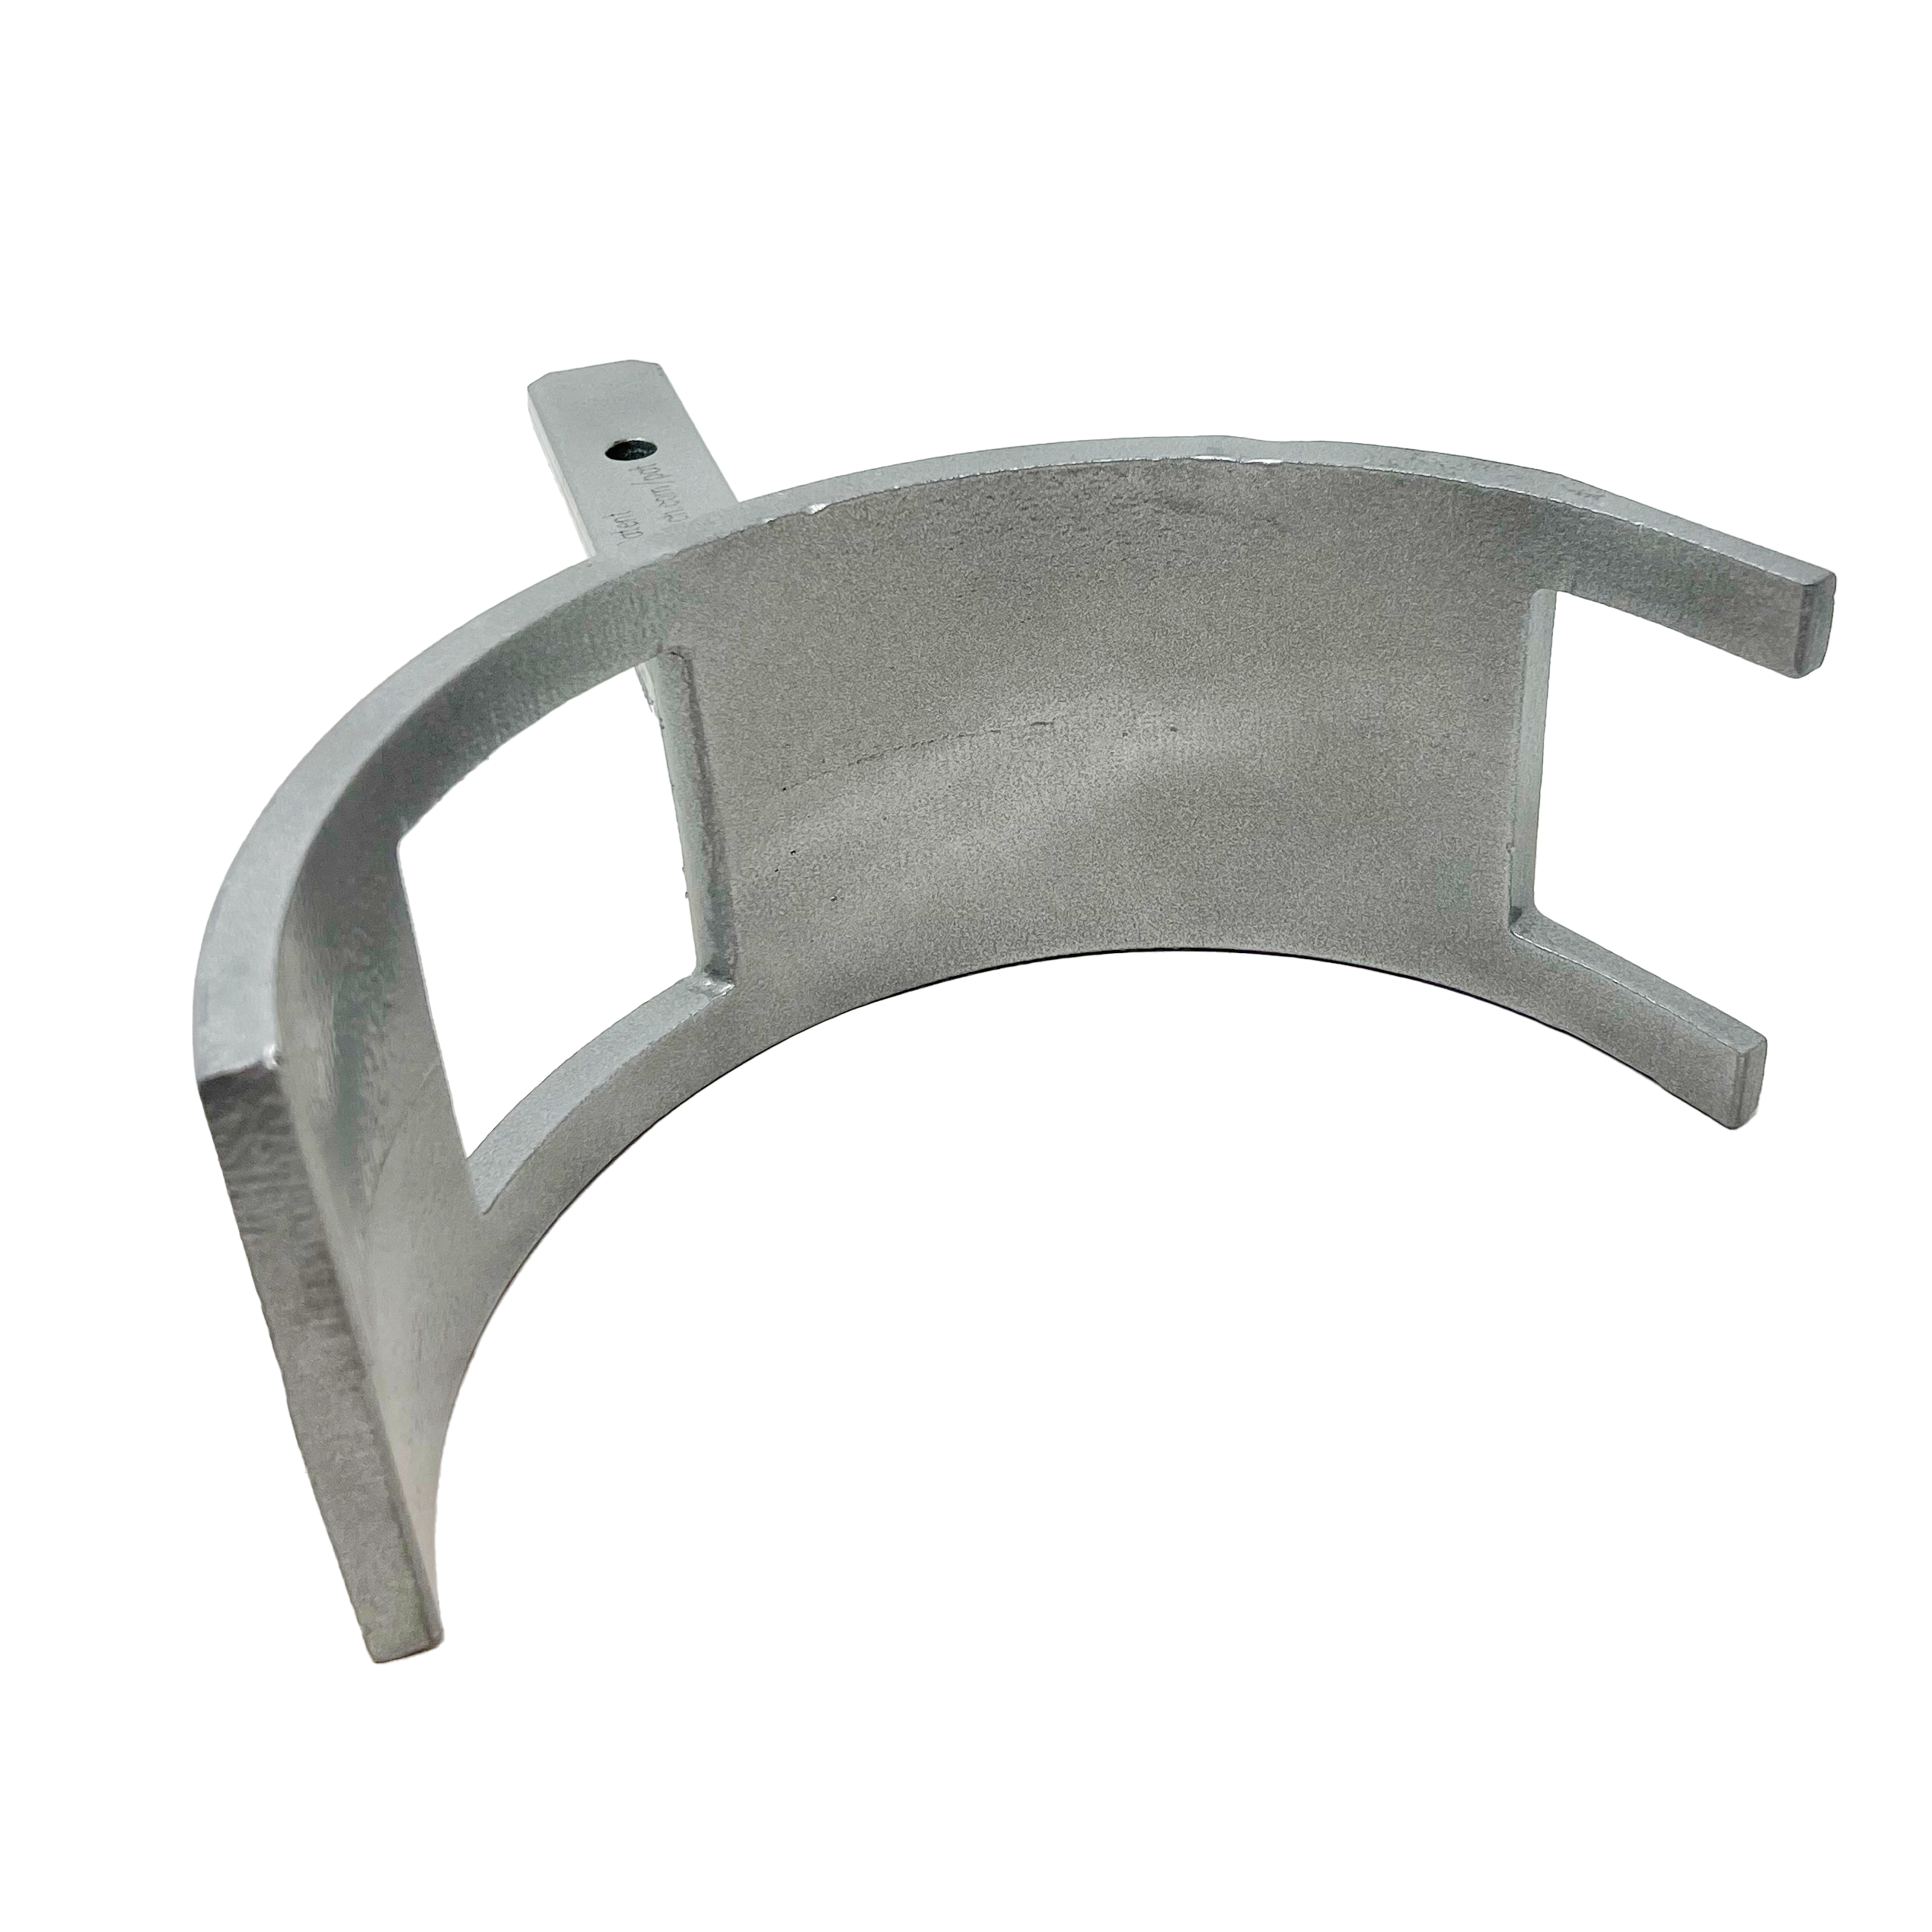 710-0050 HUWE Wrench Head for 5" Figure 1002, Figure 1502